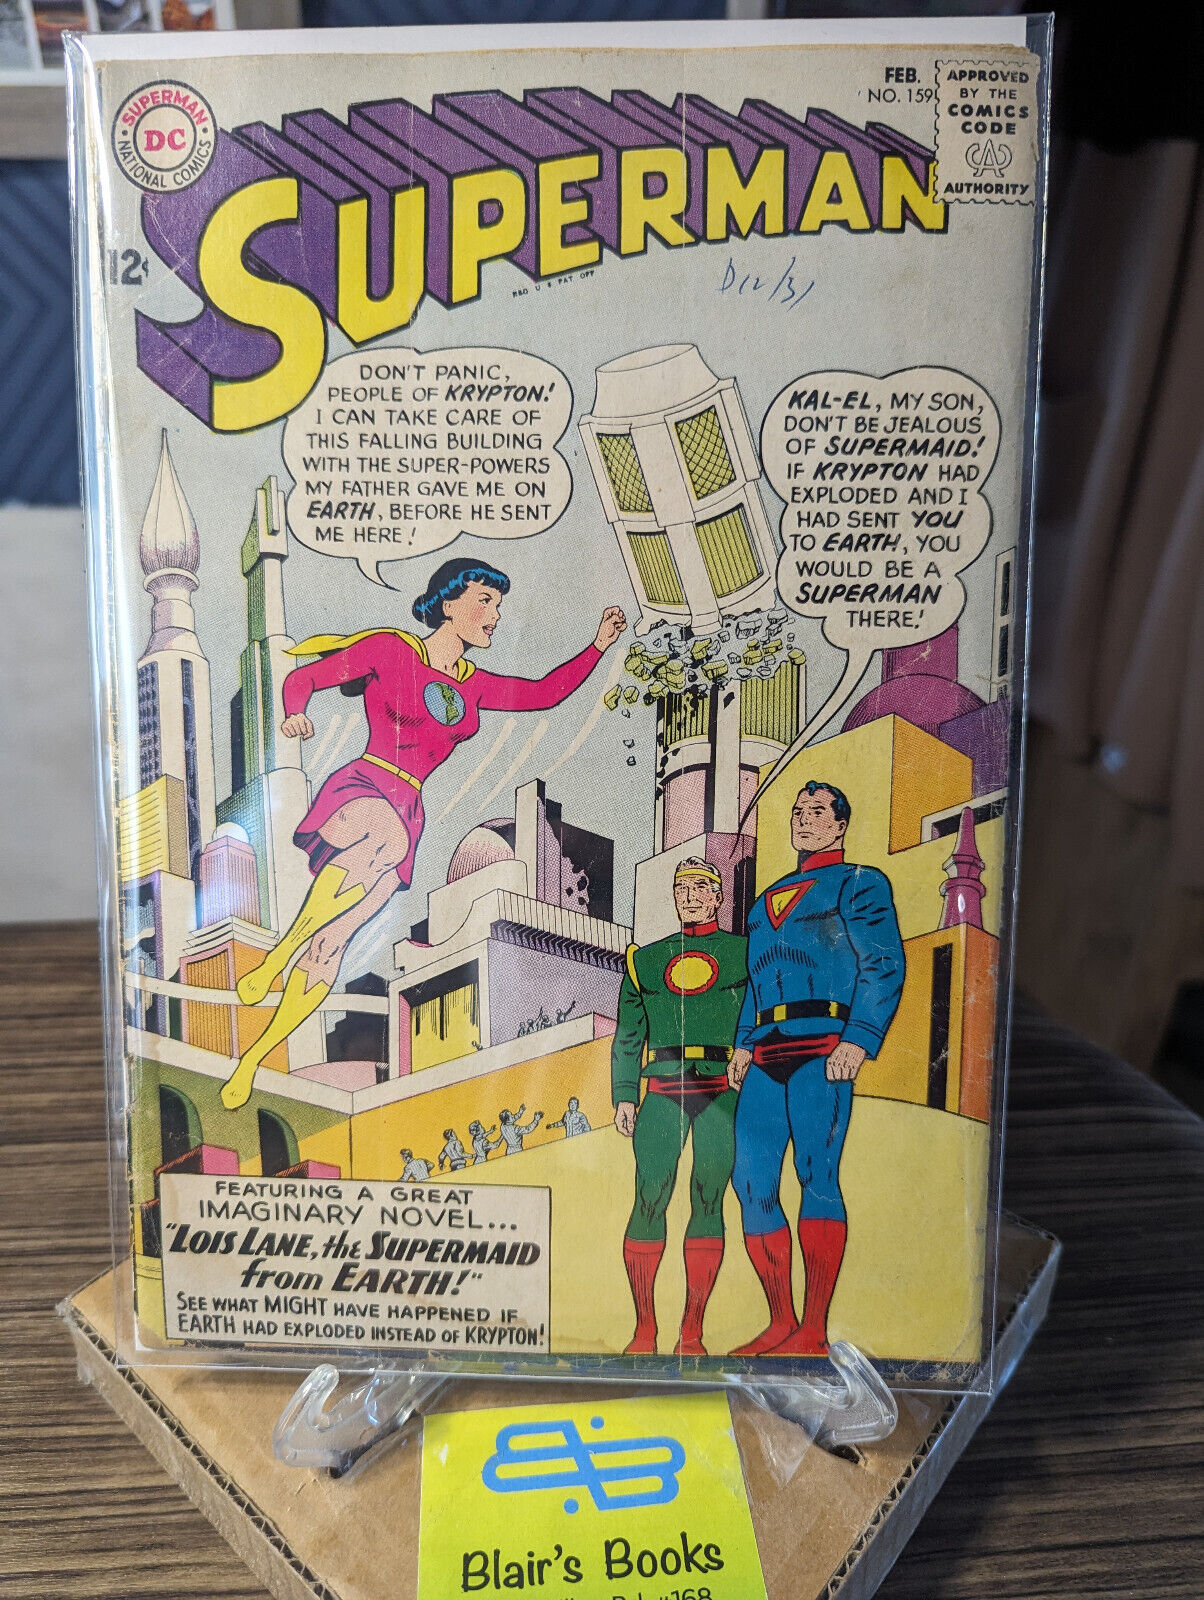 VINTAGE Silver Age DC\'s SUPERMAN #159 [1963] Curt Swan Cover; Lois is SUPER-MAID